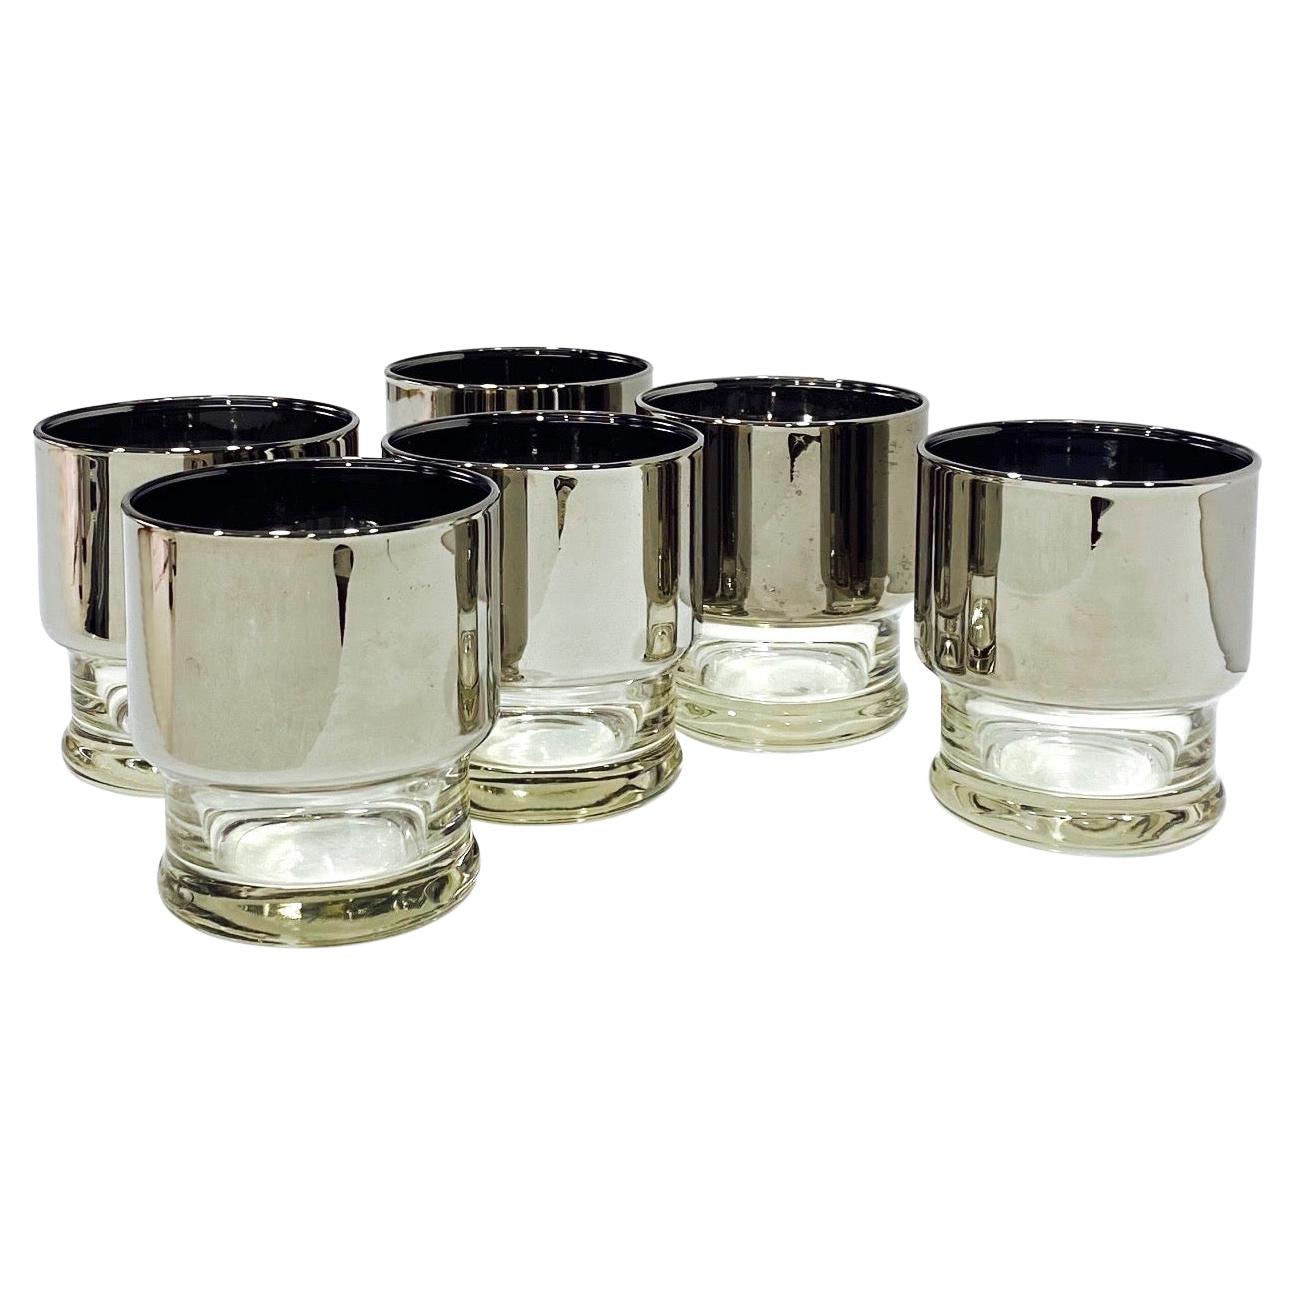 Mid-Century Modern whiskey rock glasses with bands of thick silver overlay. The silver ombre covers the top portion of the glasses which fades into the tapered clear glass bases. These iconic barware glasses make a cheerful and chic addition to any